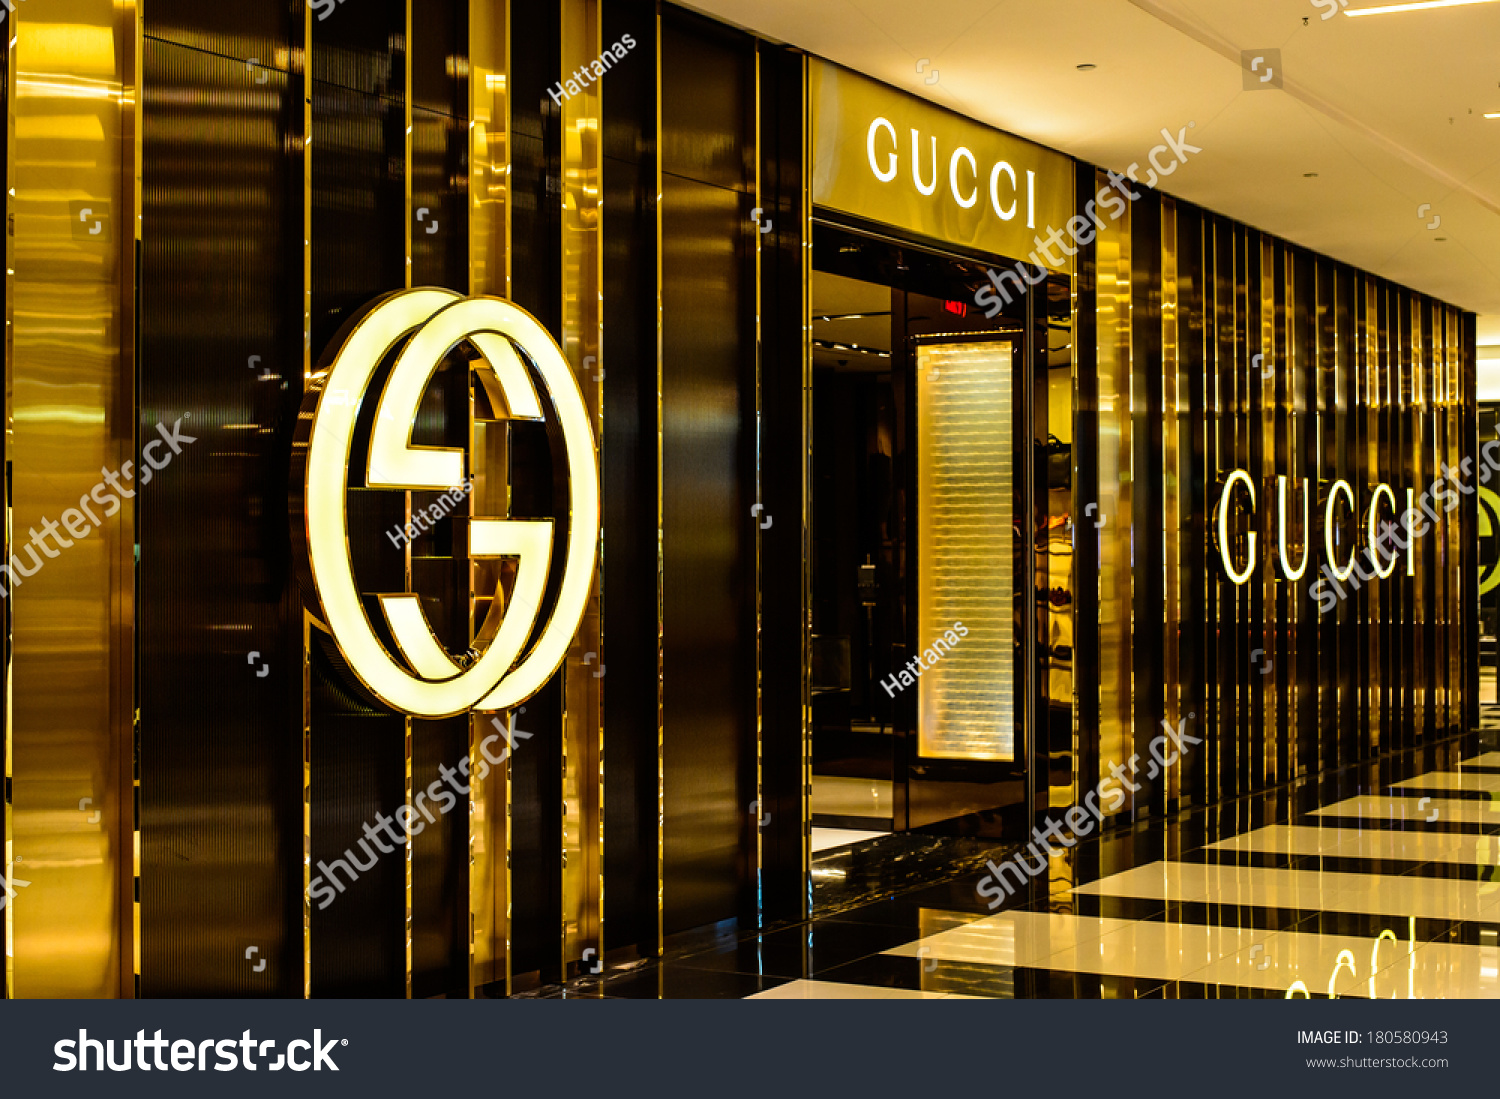 Chestnut March 8 Gucci Stock Photo (Edit Now) 180580943